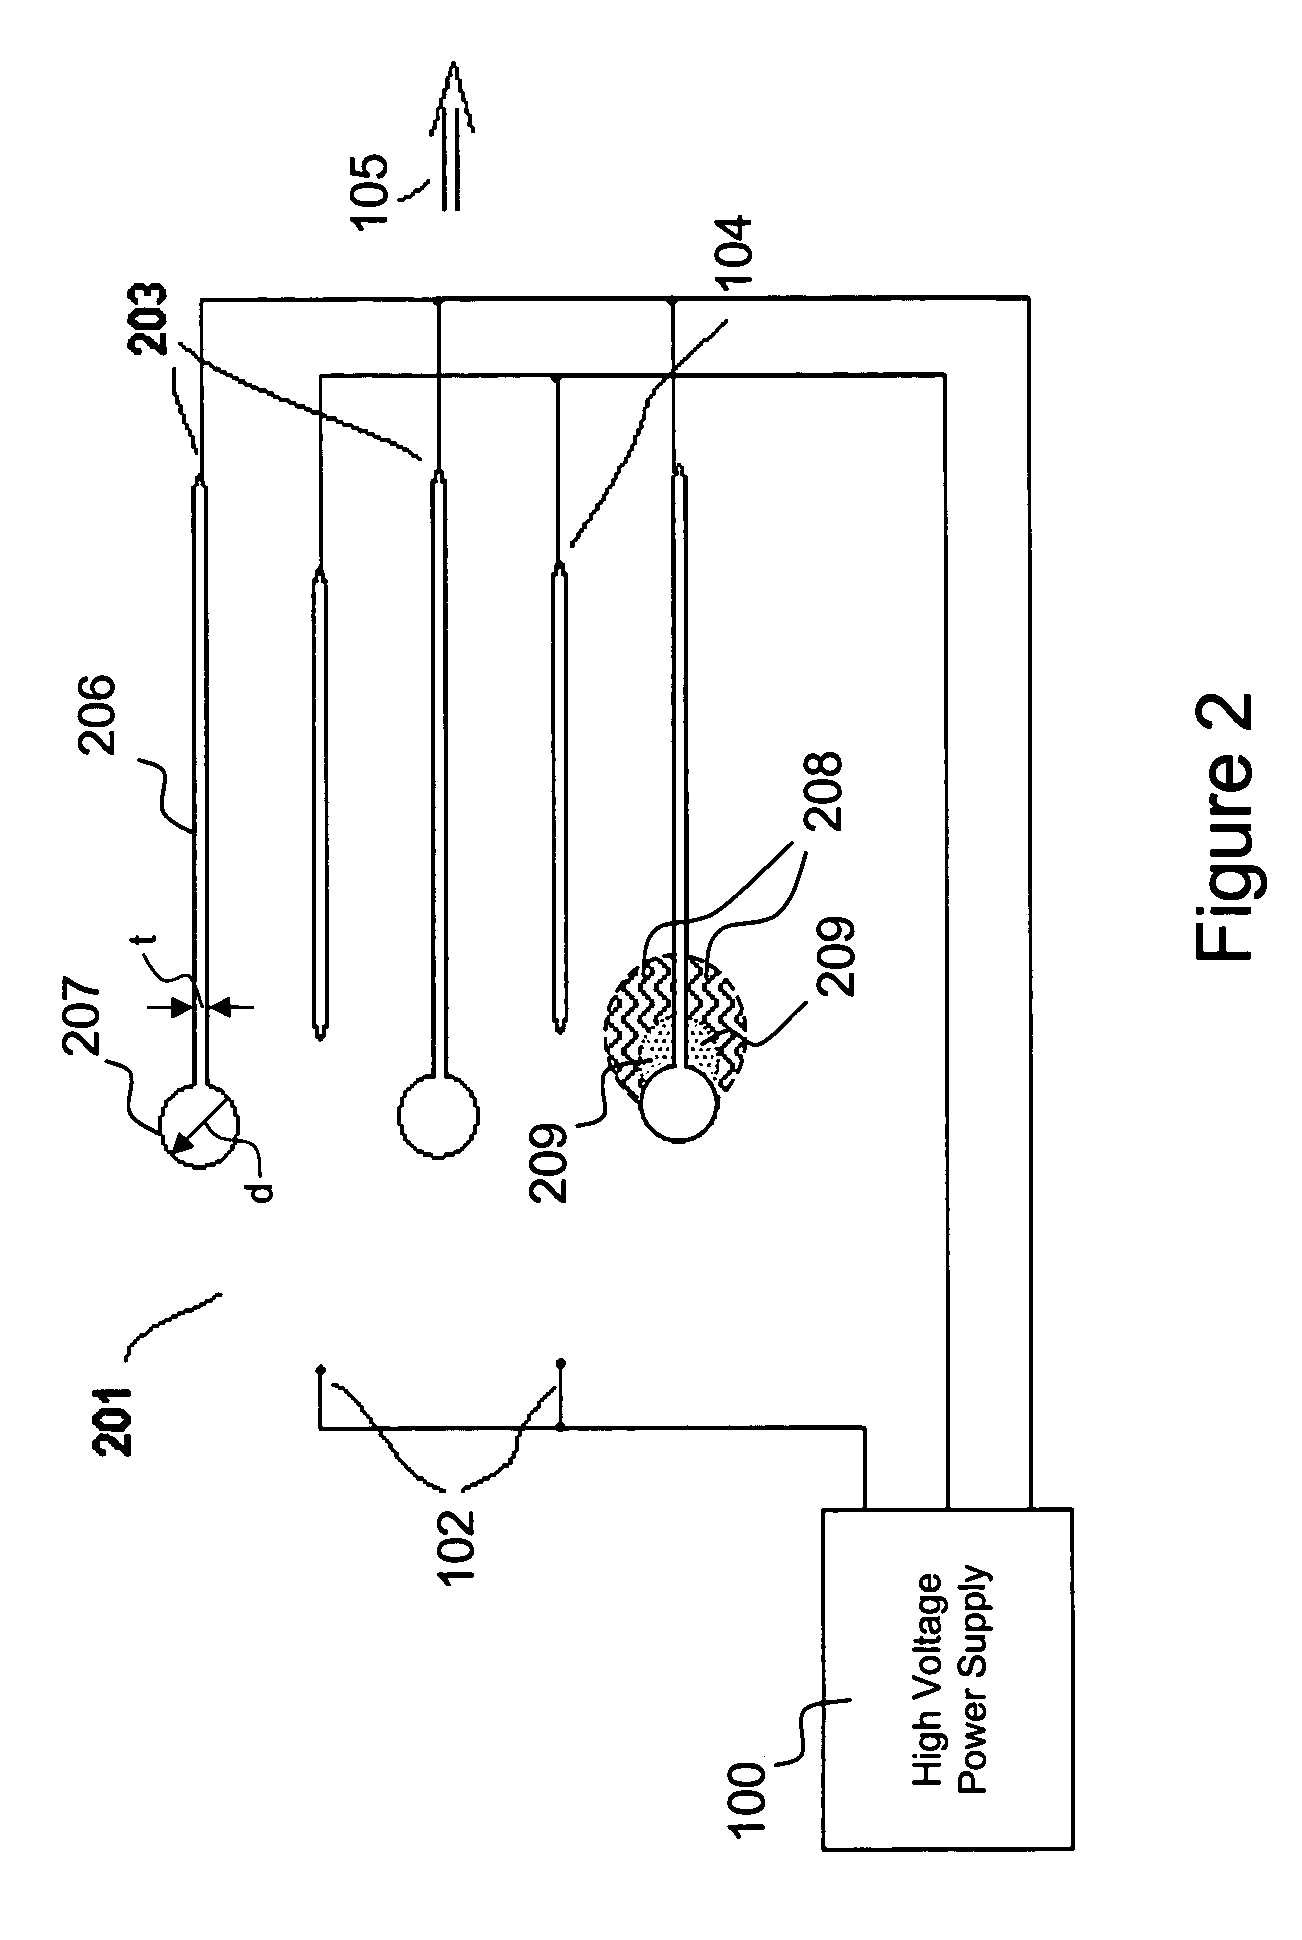 Electrostatic air cleaning device